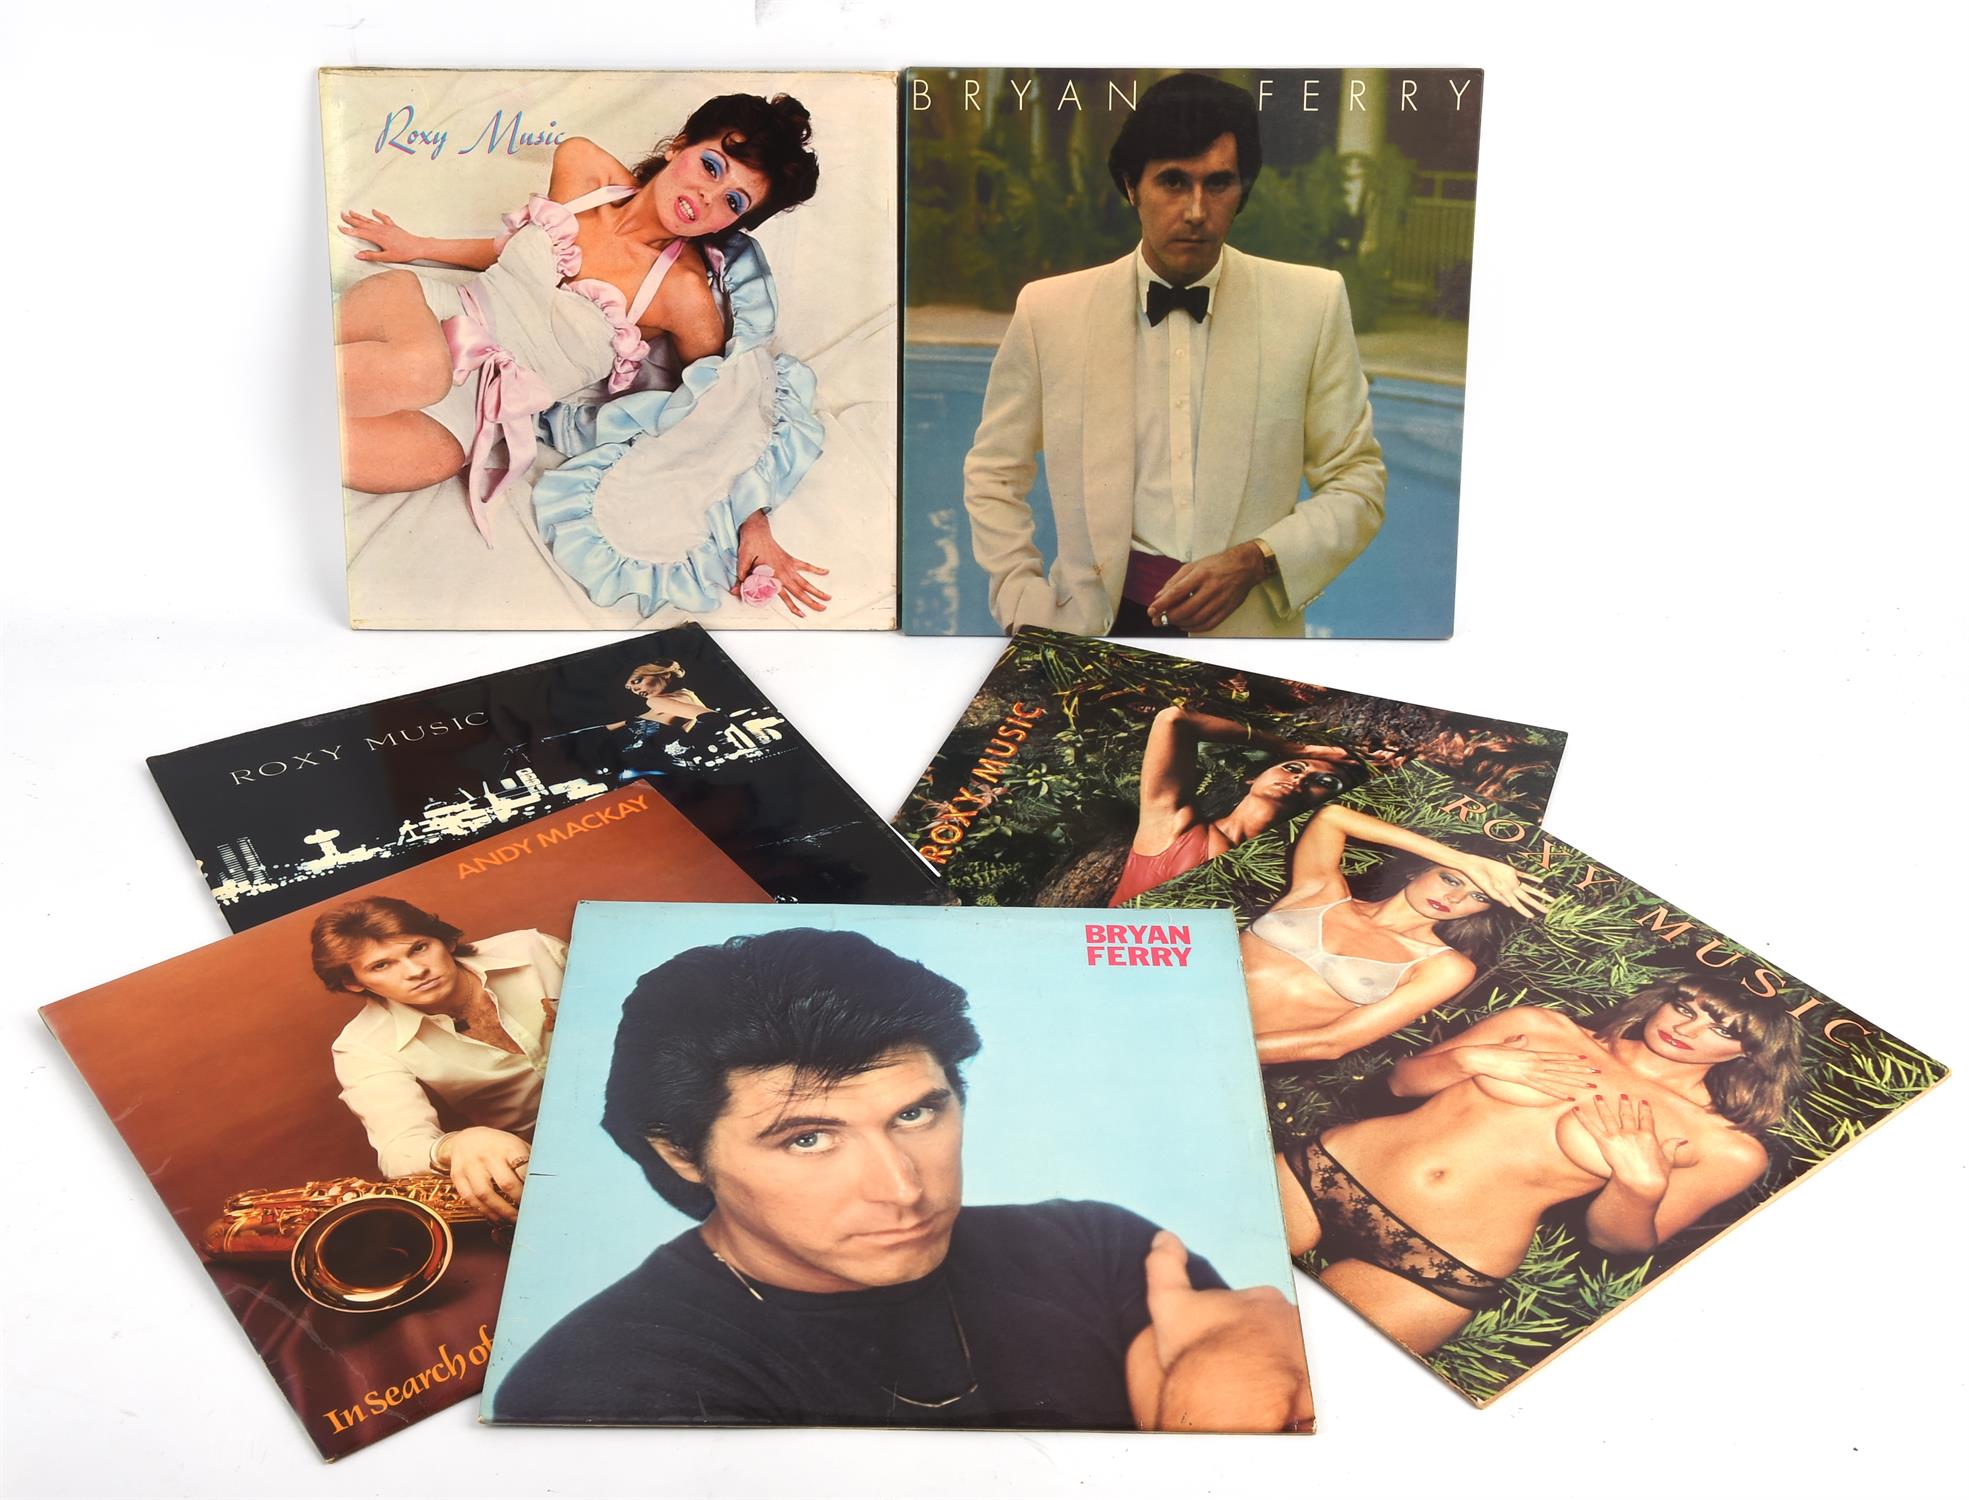 Vinyl Records - Roxy Music and Bryan Ferry / Andy McKay solo records. Roxy Music ILPS 9200,